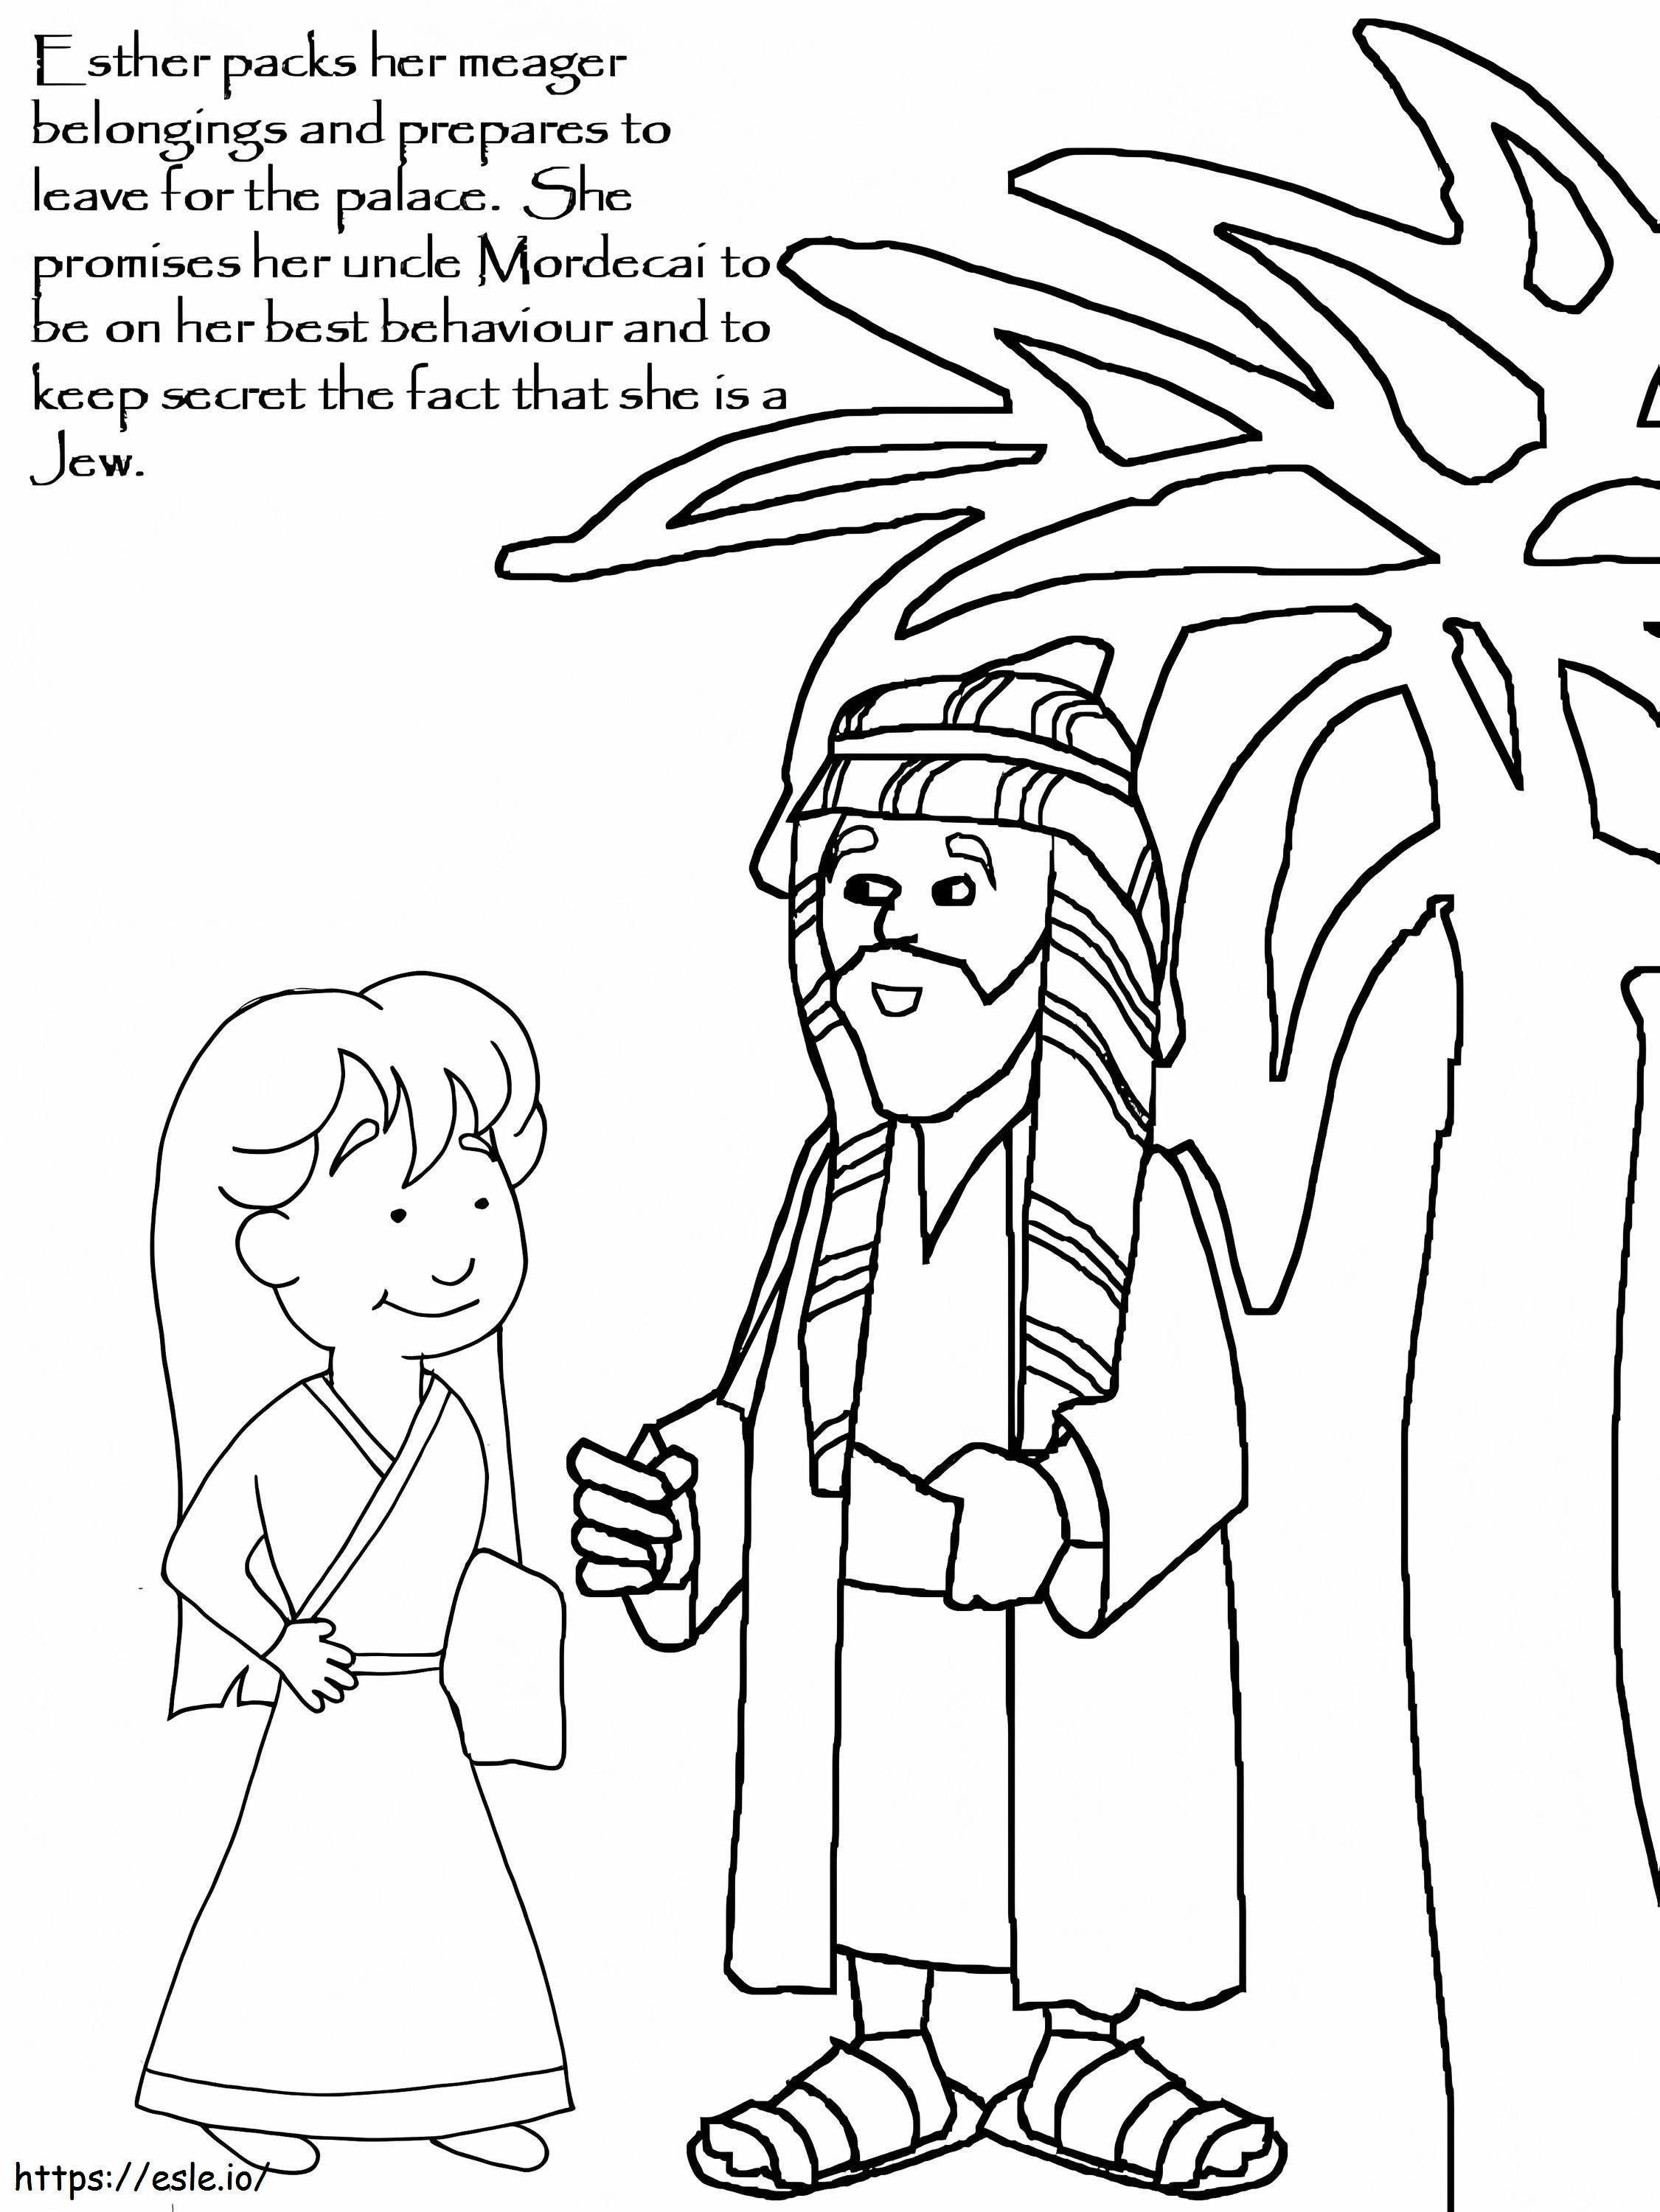 The Story Of Esther coloring page